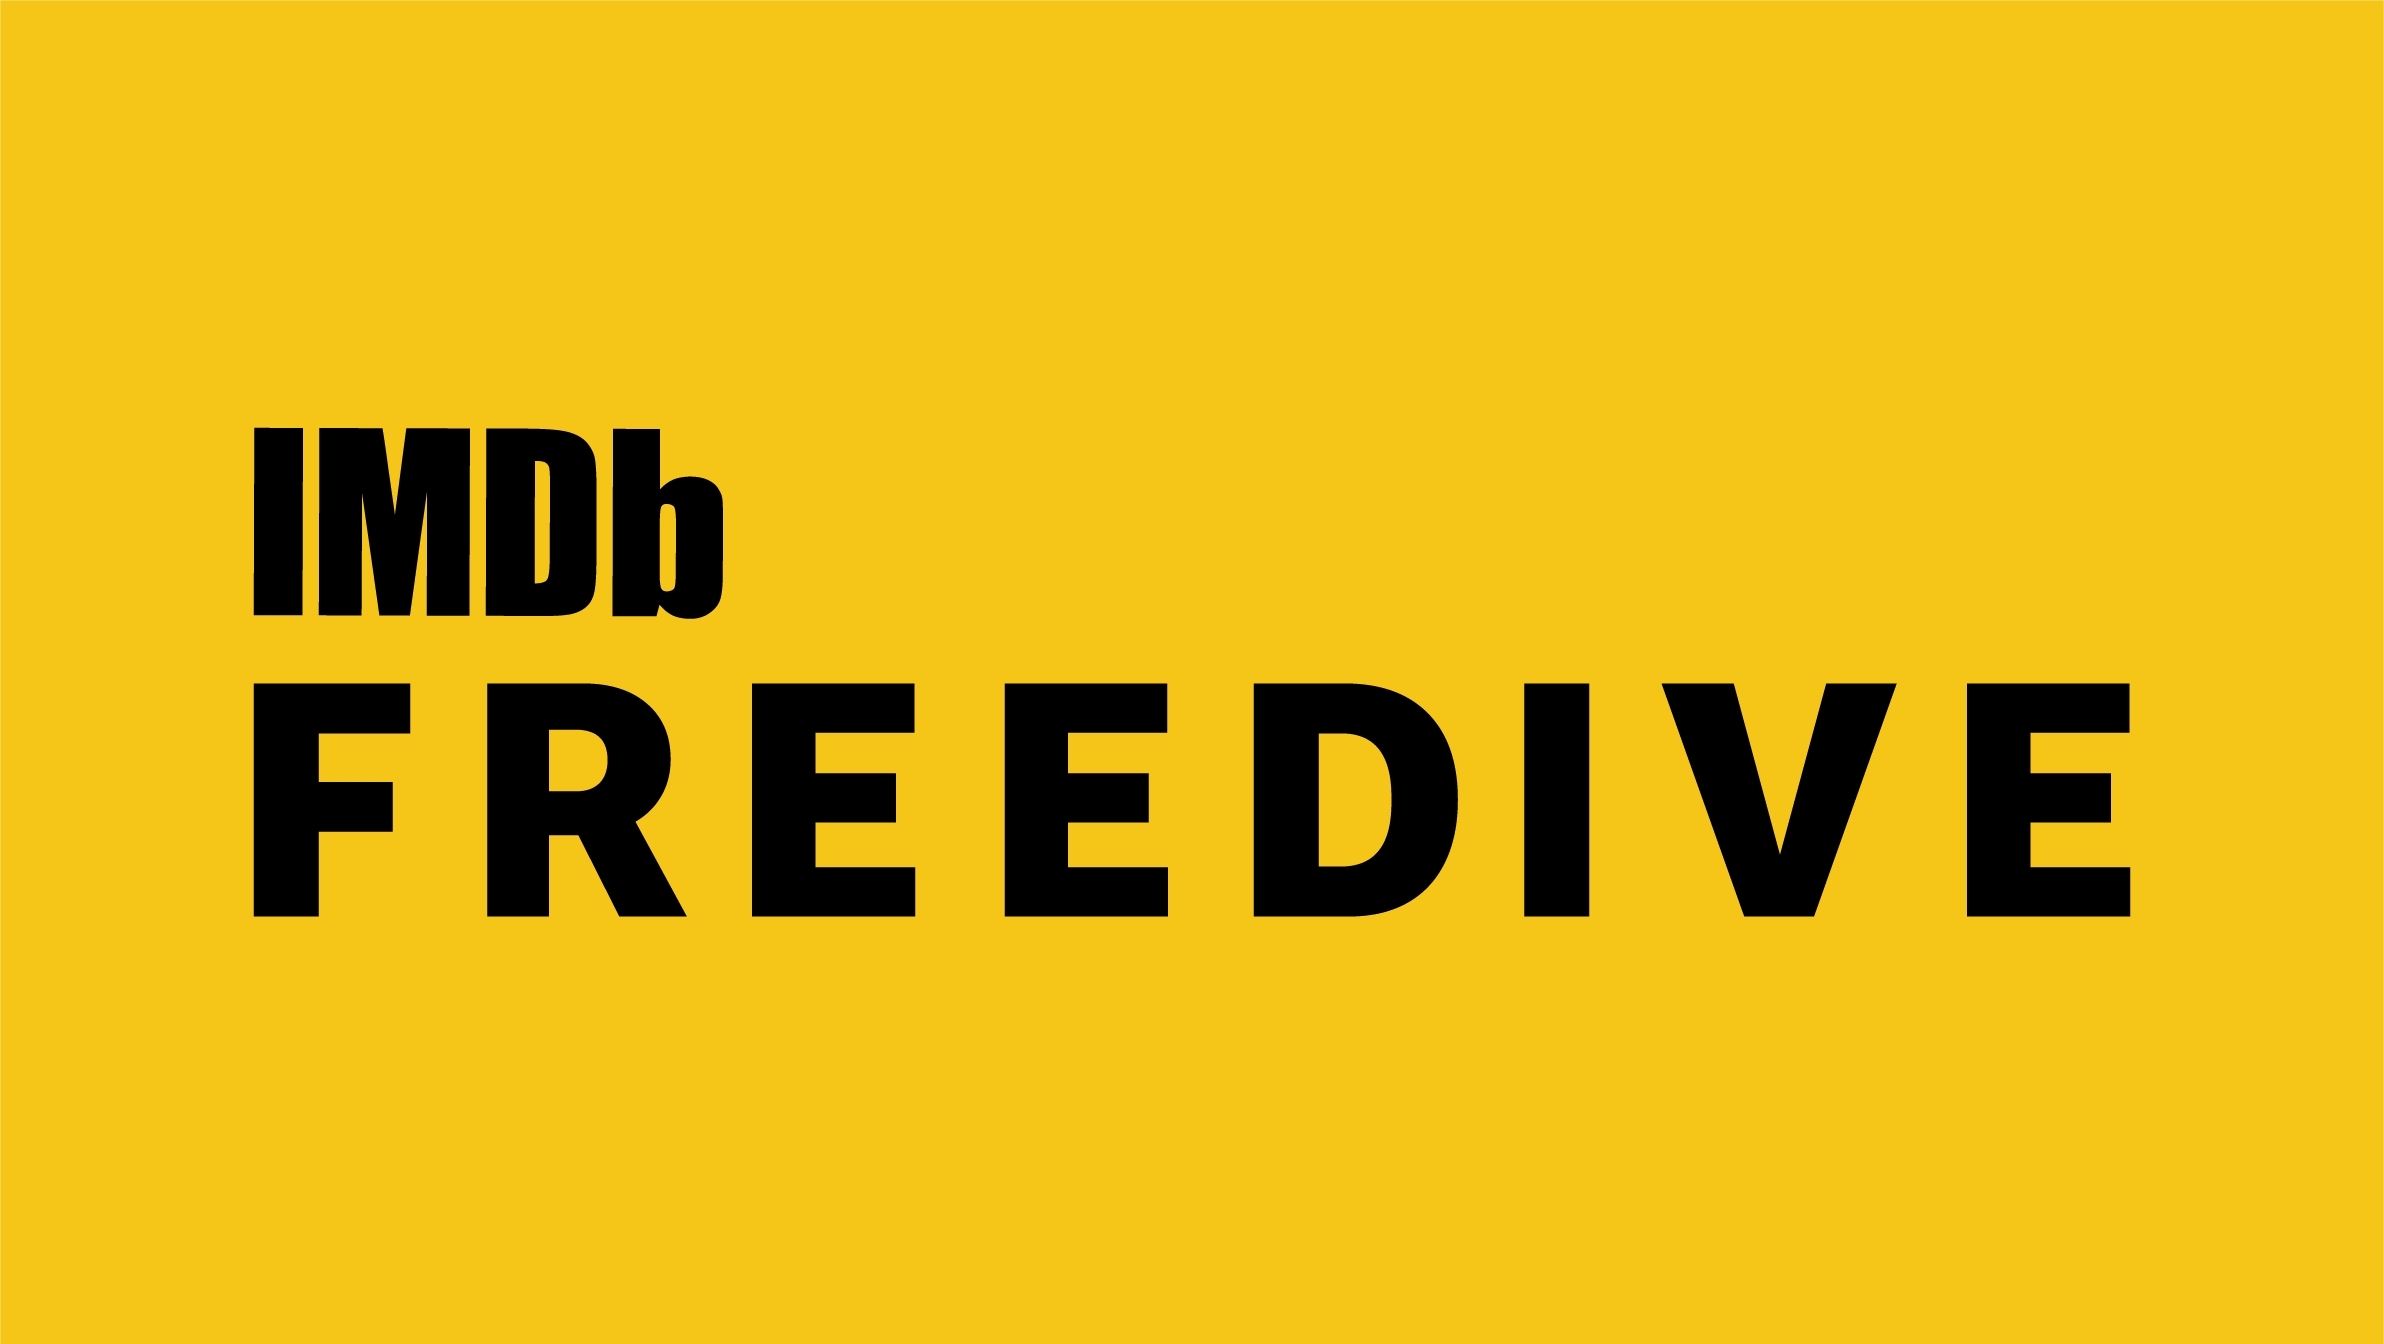 Imdb Launches Freedive A Free Streaming Video Channel Featuring Hit Movies And Tv Shows Business Wire